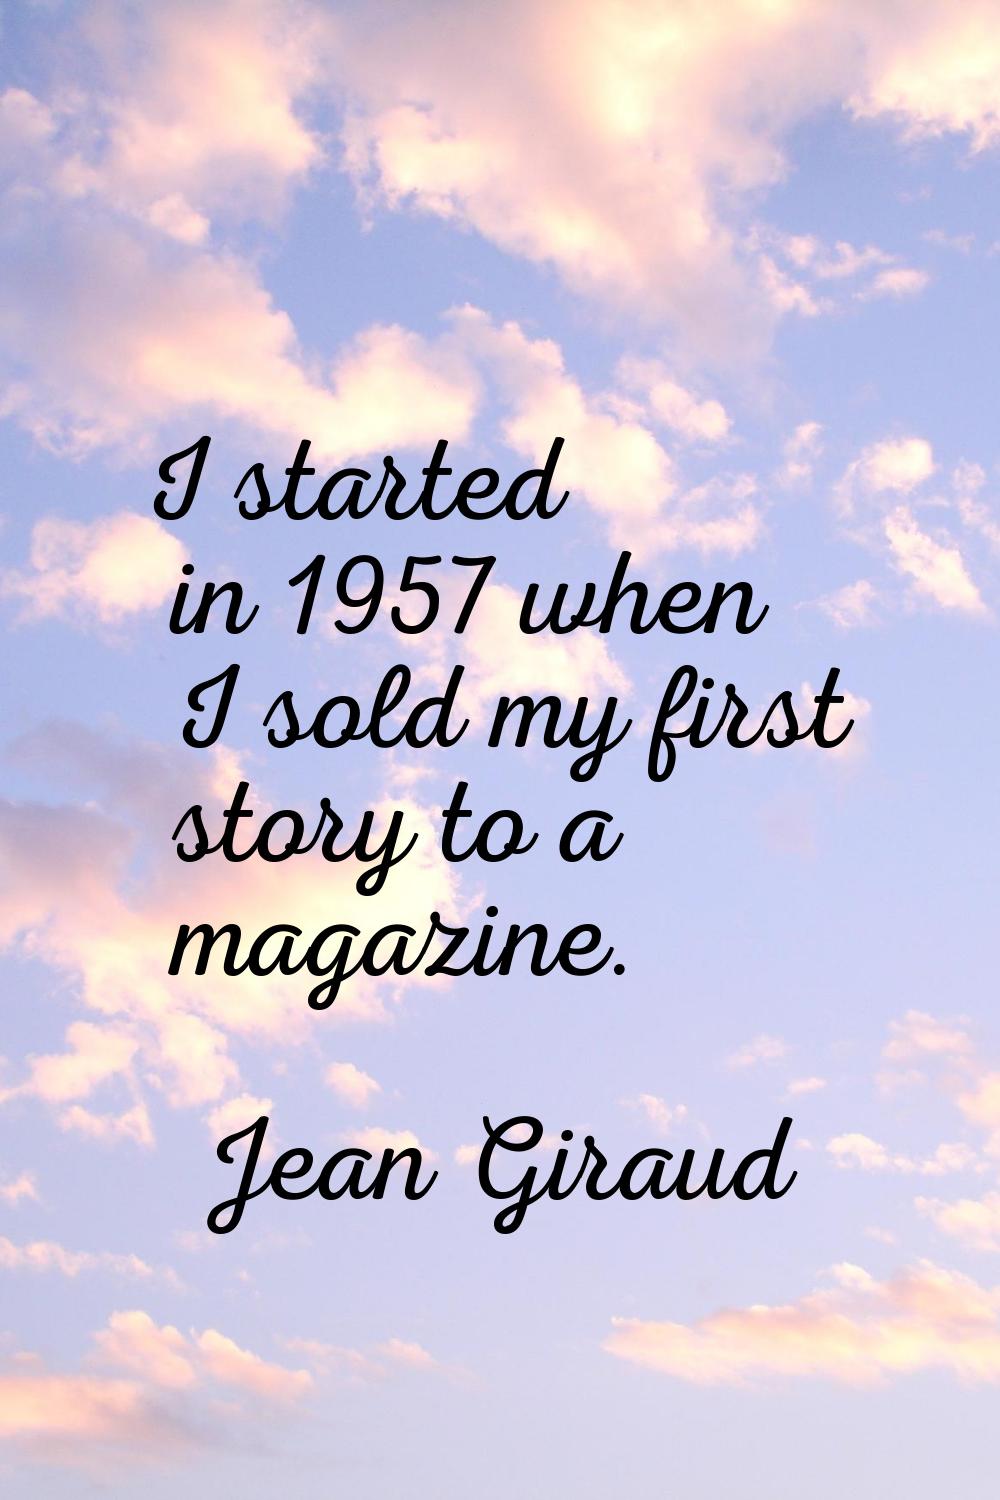 I started in 1957 when I sold my first story to a magazine.